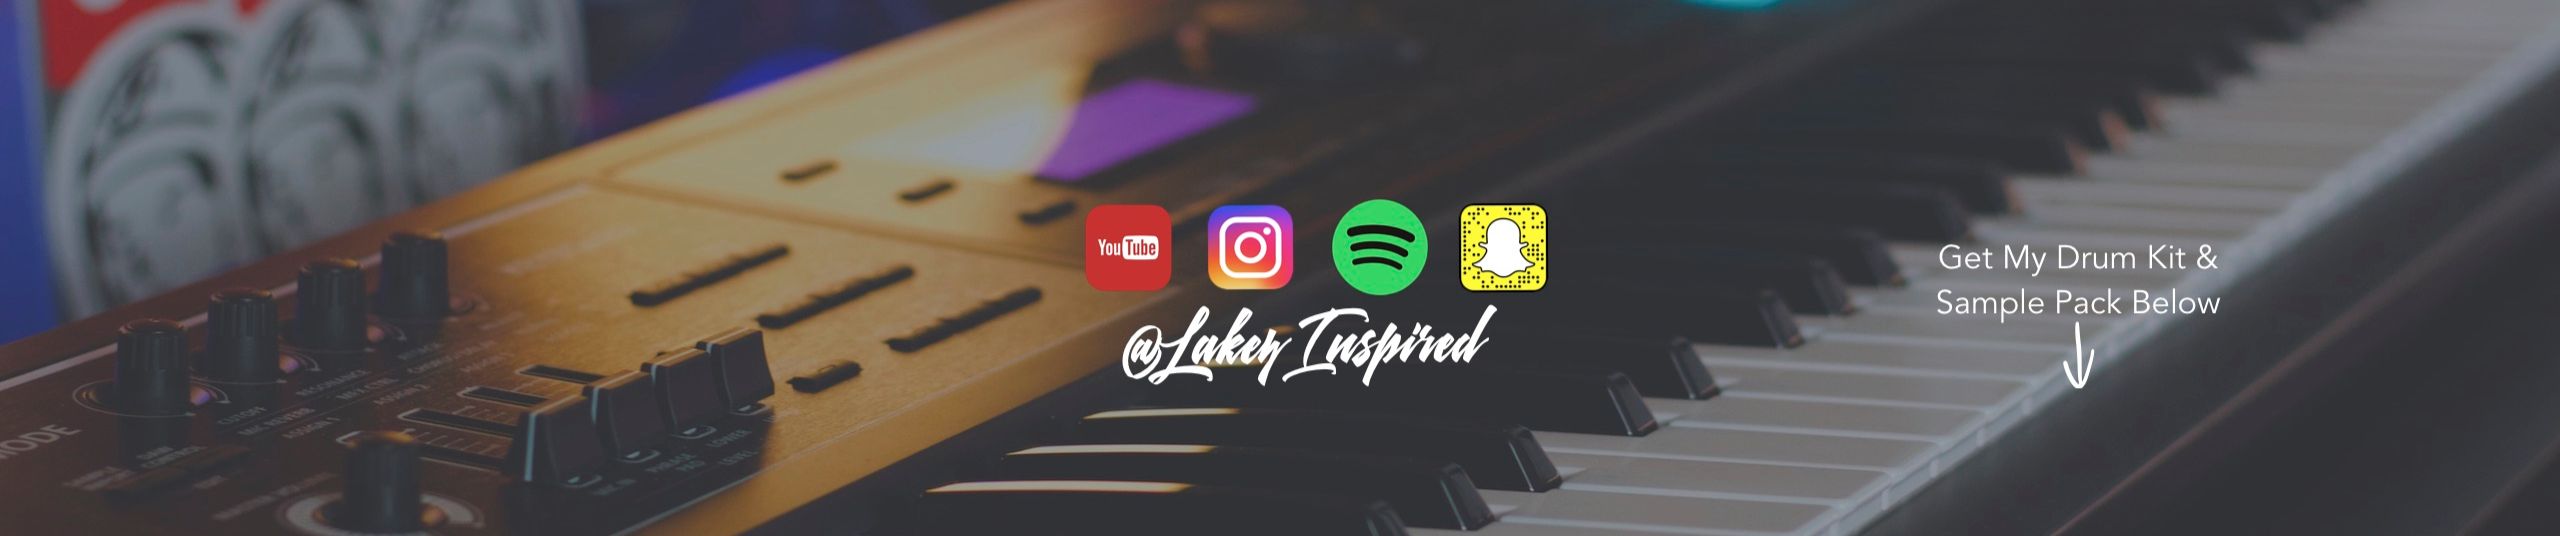 LAKEY INSPIRED | Free Listening on SoundCloud